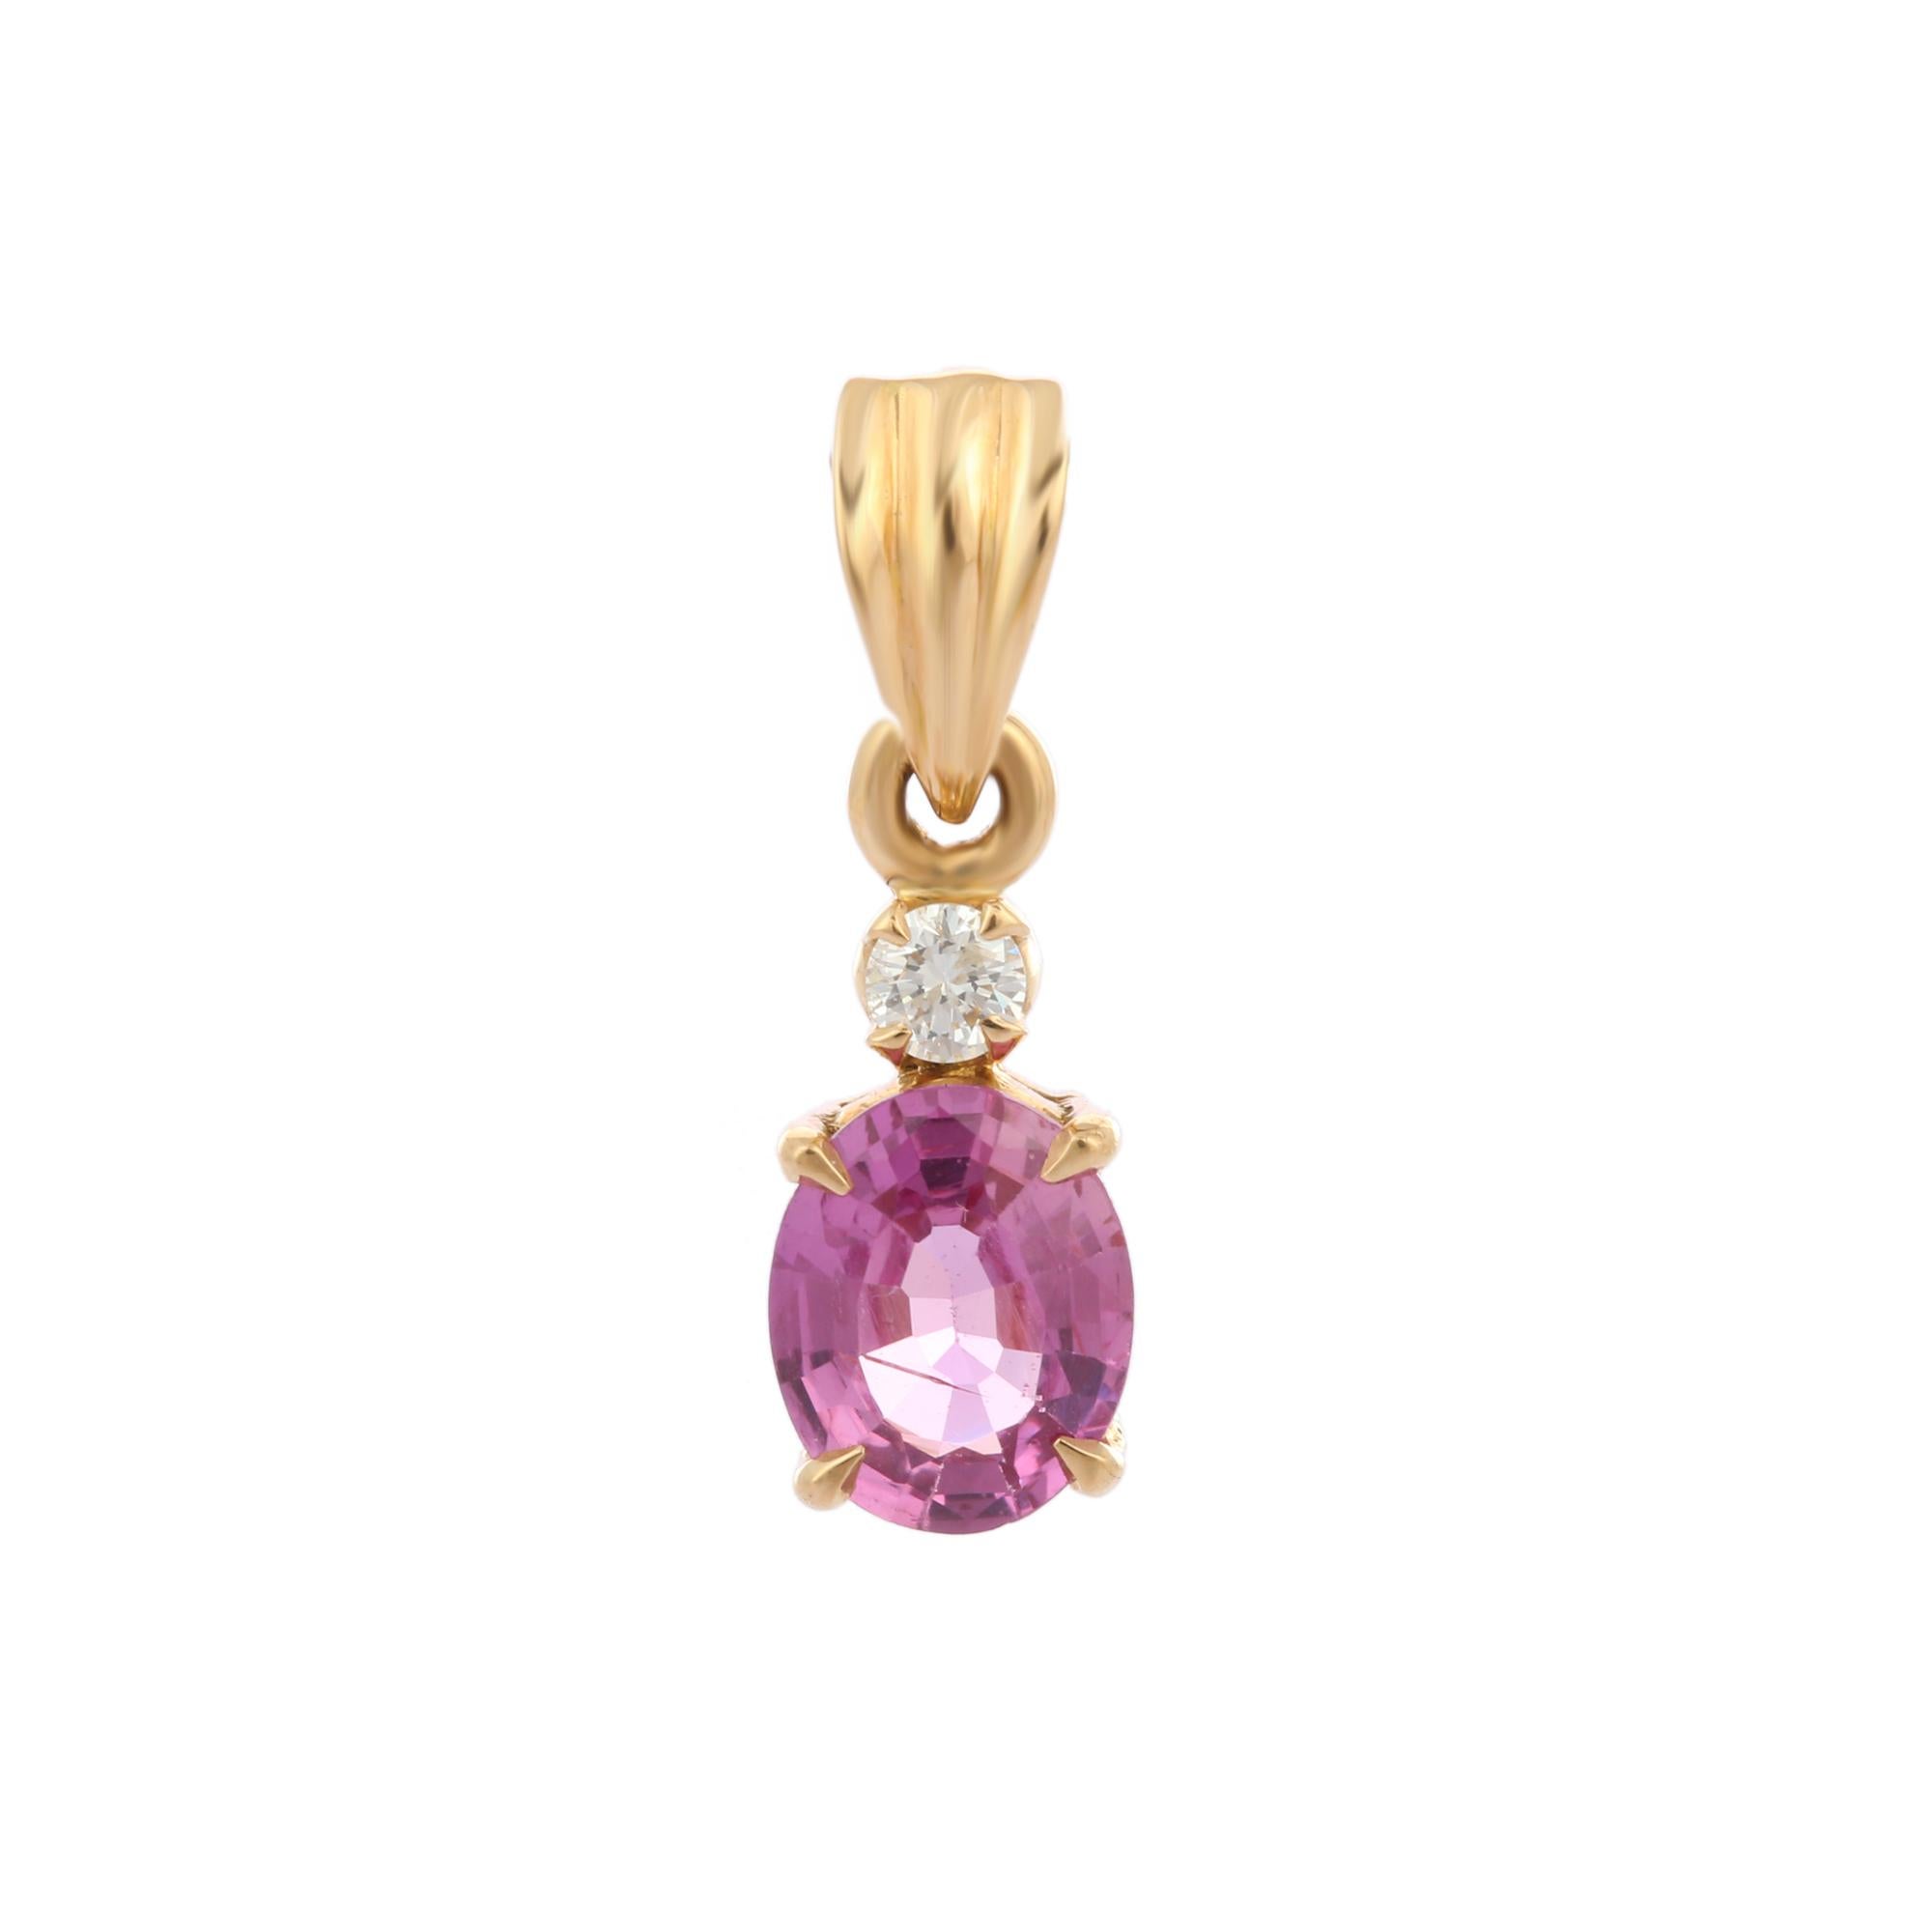 Minimalist Pink Sapphire with Diamond Pendant in 18K Gold. It has a oval cut sapphire with diamond that completes your look with a decent touch. Pendants are used to wear or gifted to represent love and promises. It's an attractive jewelry piece